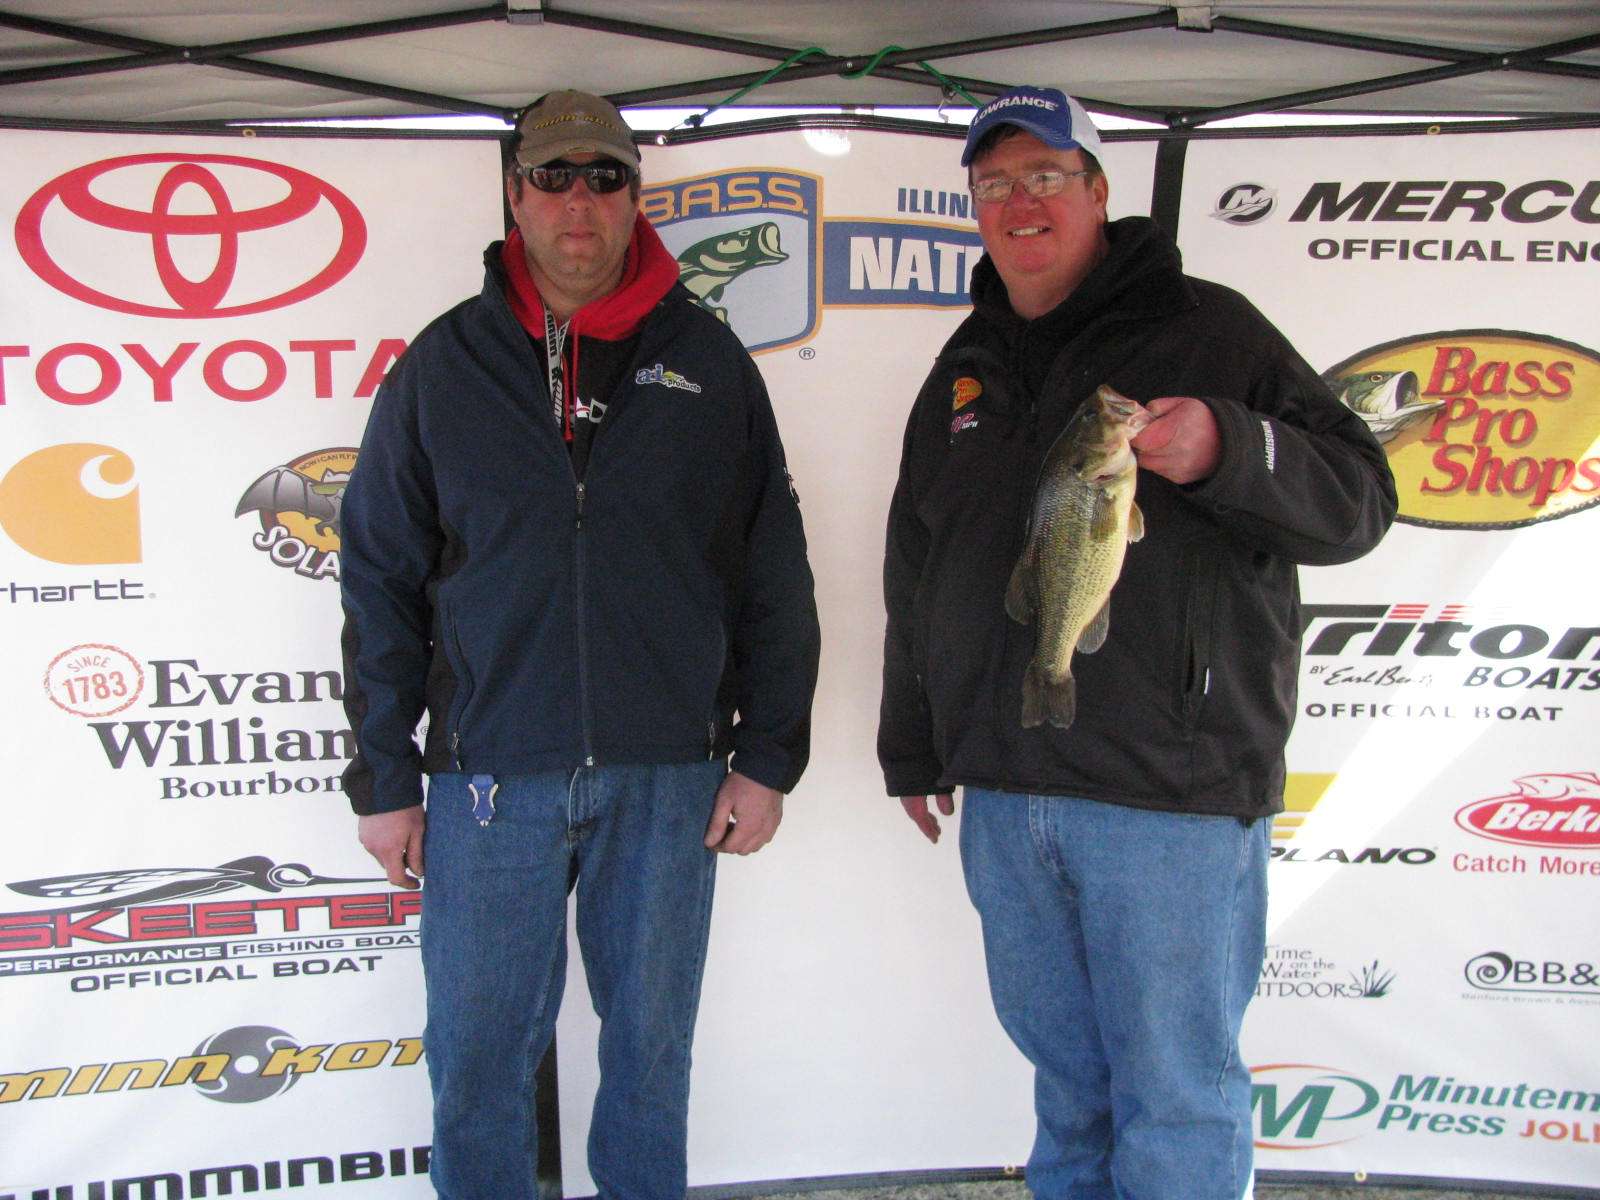 2nd Place - Brent Swartz and Brian Tutko